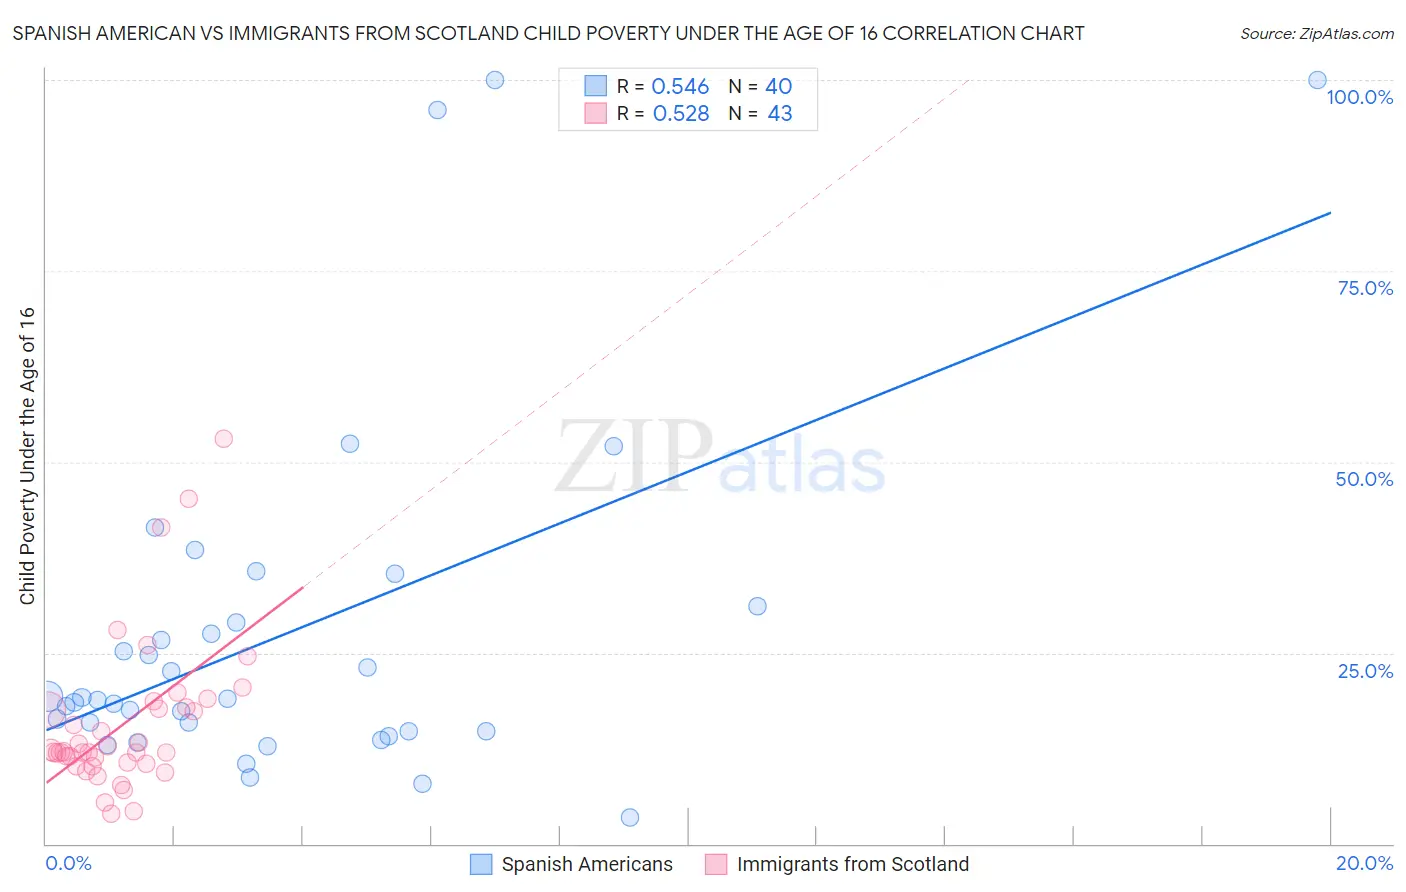 Spanish American vs Immigrants from Scotland Child Poverty Under the Age of 16